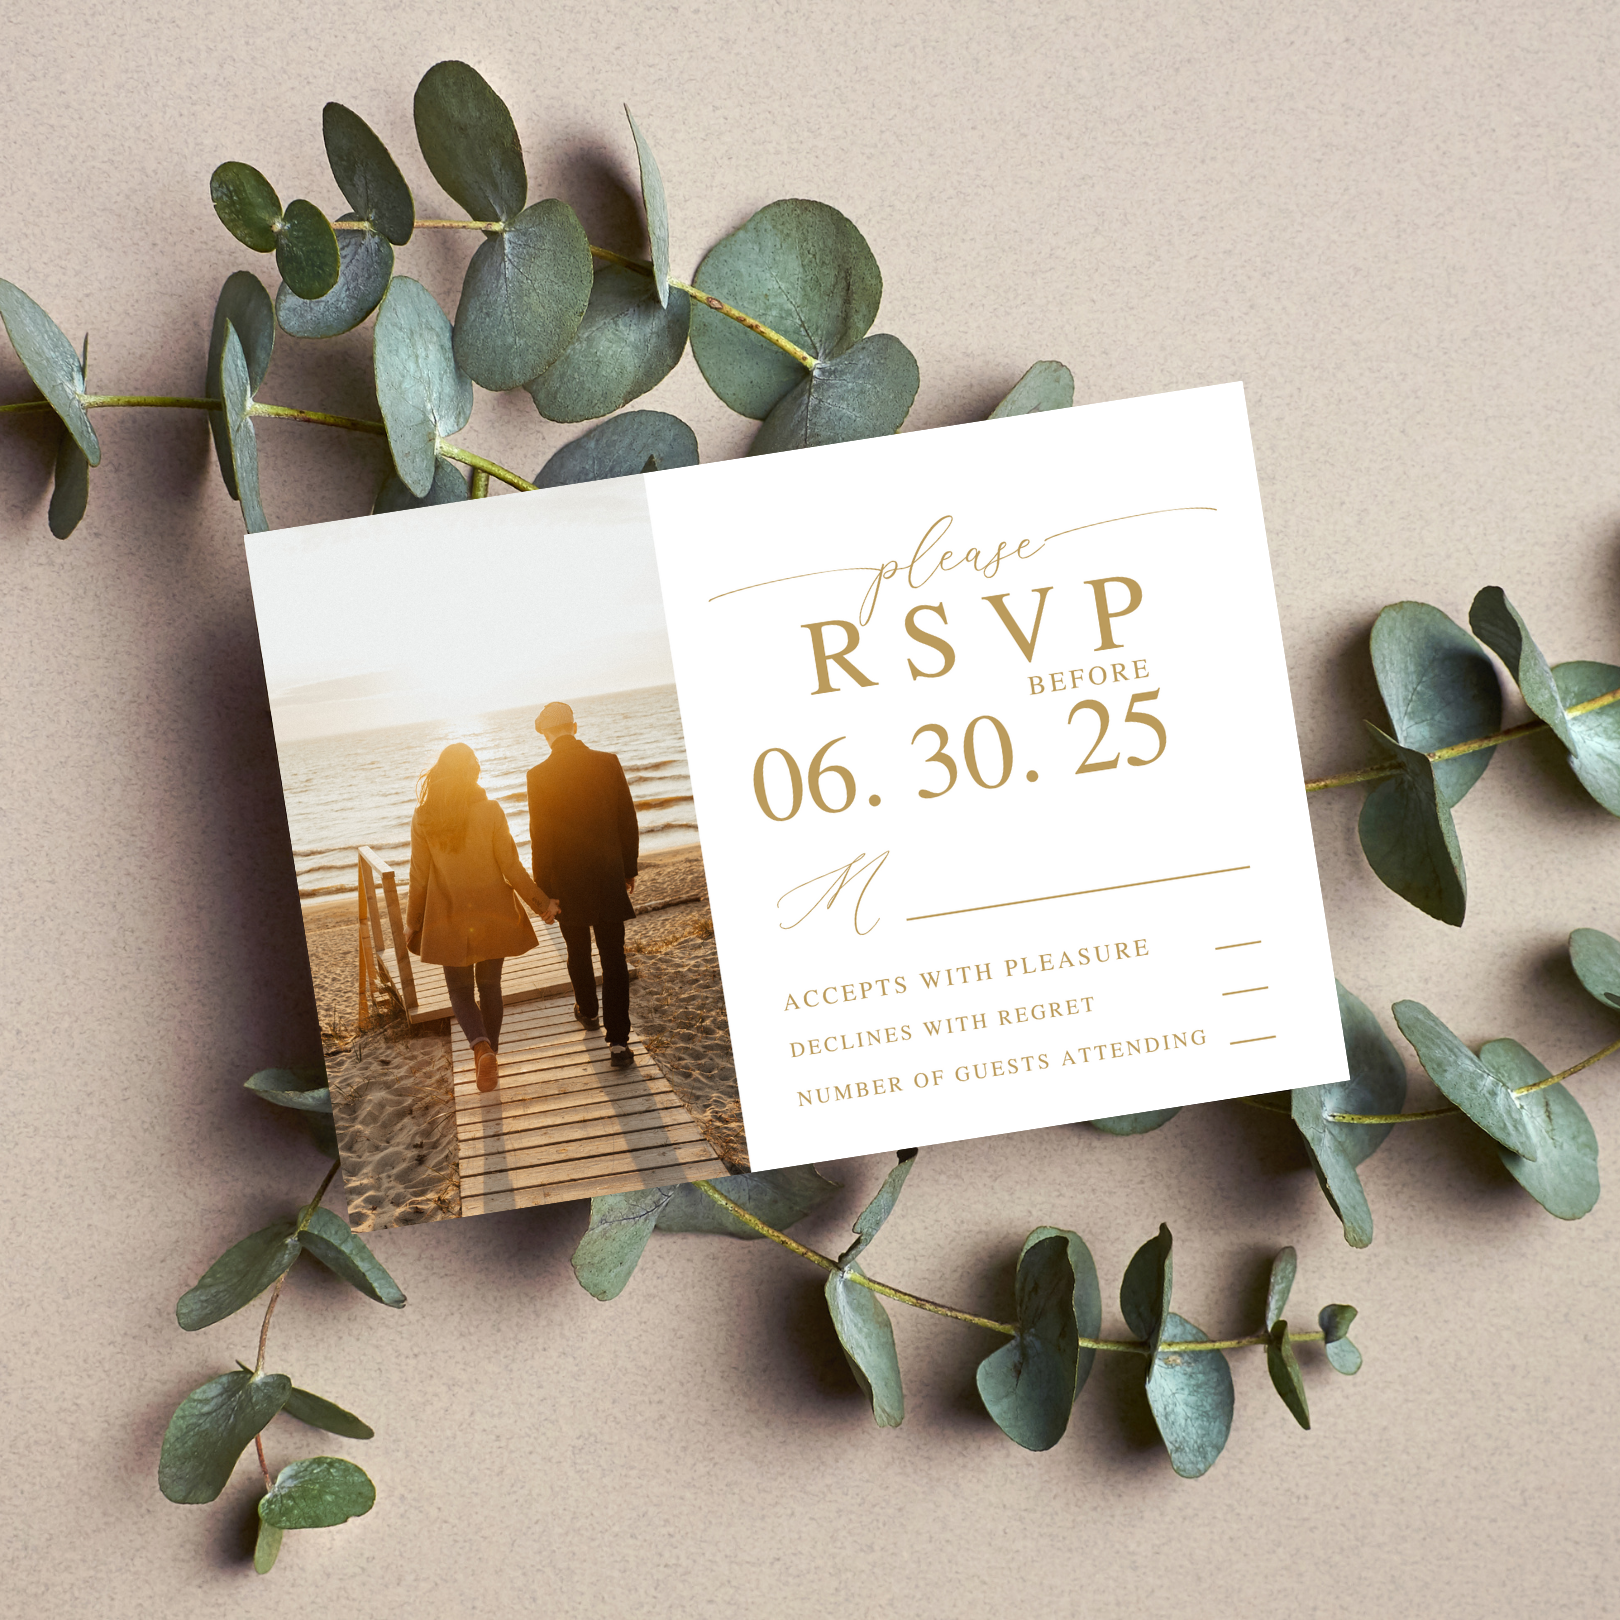 An R.S.V.P. card sits on top of a spray of eucalyptus on a neutral coloured background. The R.S.V.P. card has a photo of a couple on the left hand side who have their backs turned to the camera and are walking down the beach. On the right side of the card is information for guests.